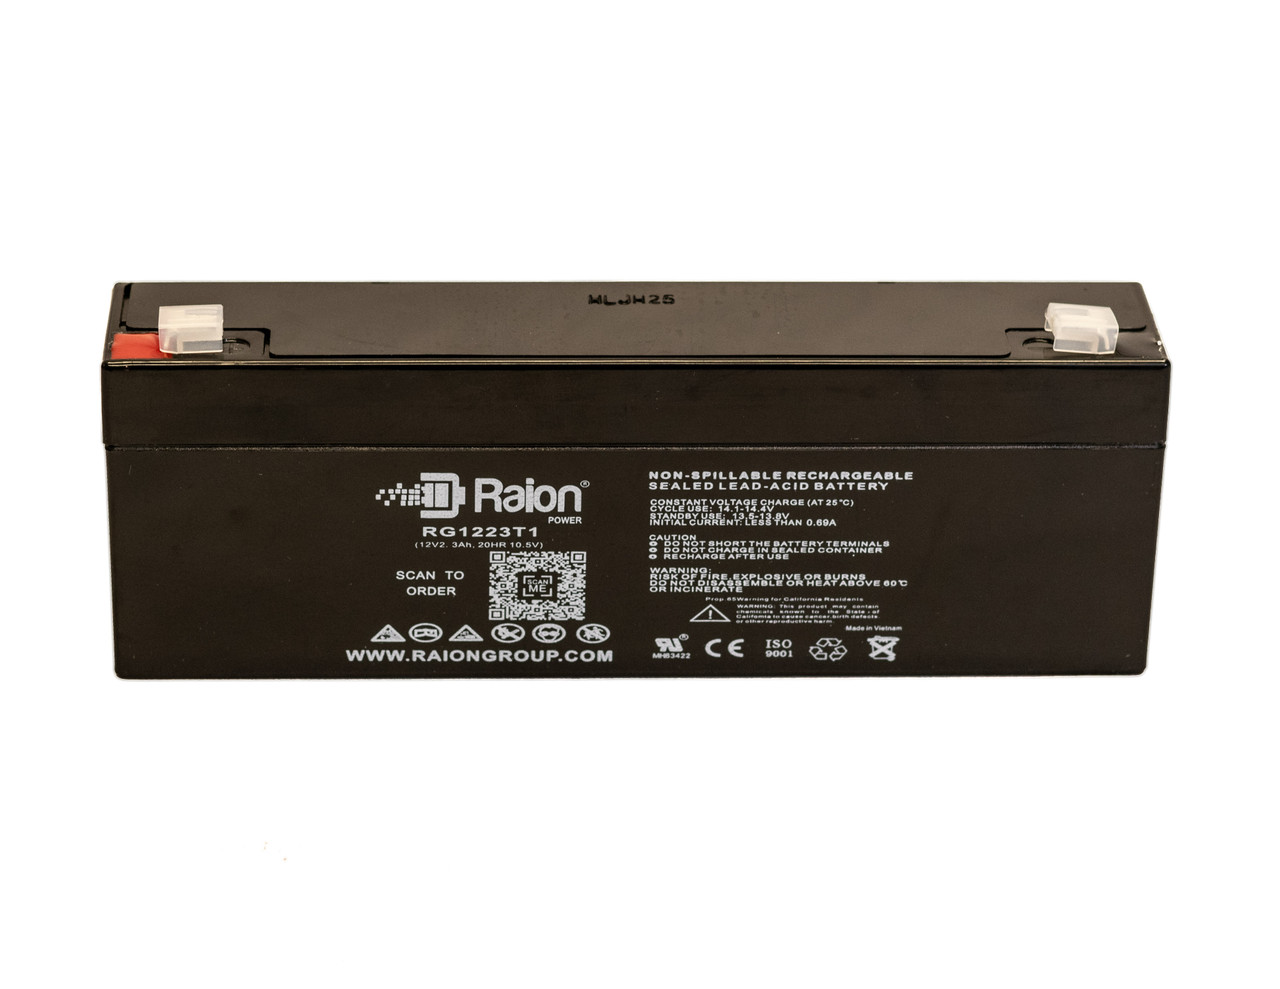 Raion Power 12V 2.3Ah SLA Battery With T1 Terminals For Ivac Medical Systems 3000 Keofeed Infusion Pump